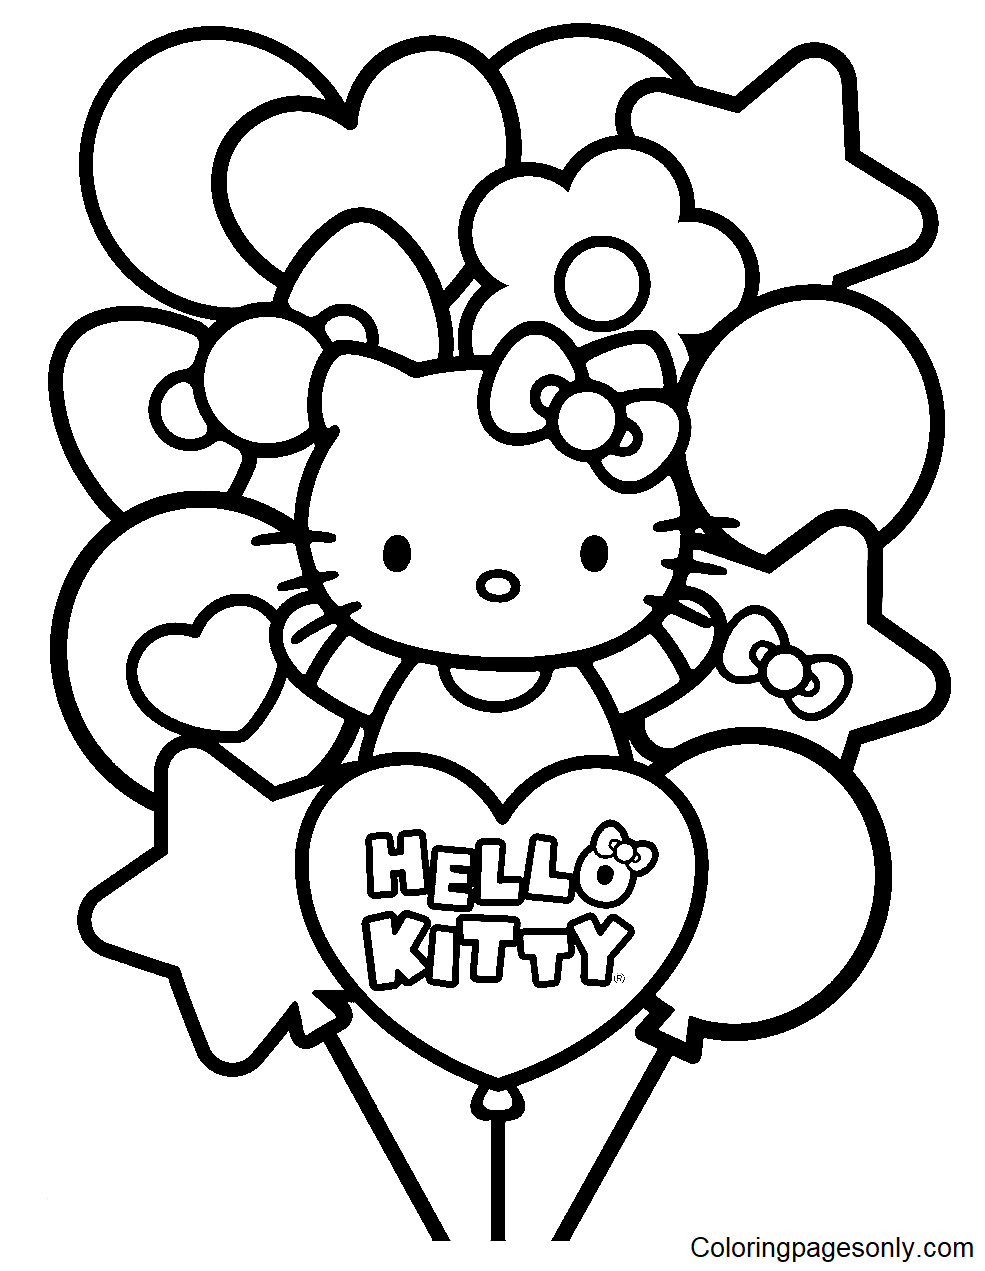 adorable-hello-kitty-coloring-page-free-printable-coloring-pages